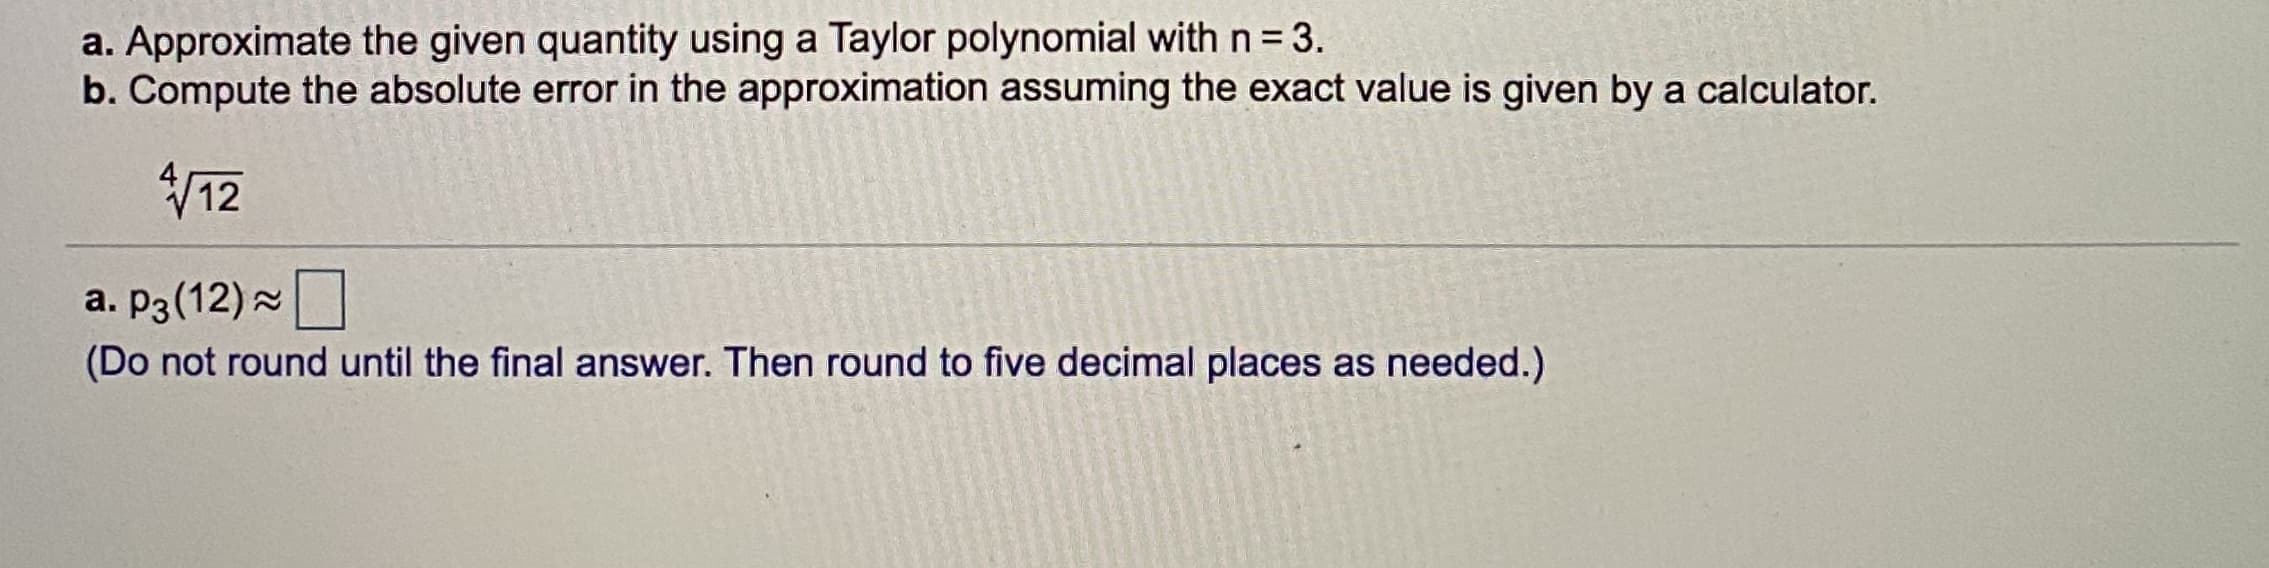 a. Approximate the given quantity using a Taylor polynomial with n = 3.
b. Compute the absolute error in the approximation assuming the exact value is given by a calculator.
V12
a. P3(12)
(Do not round until the final answer. Then round to five decimal places as needed.)
